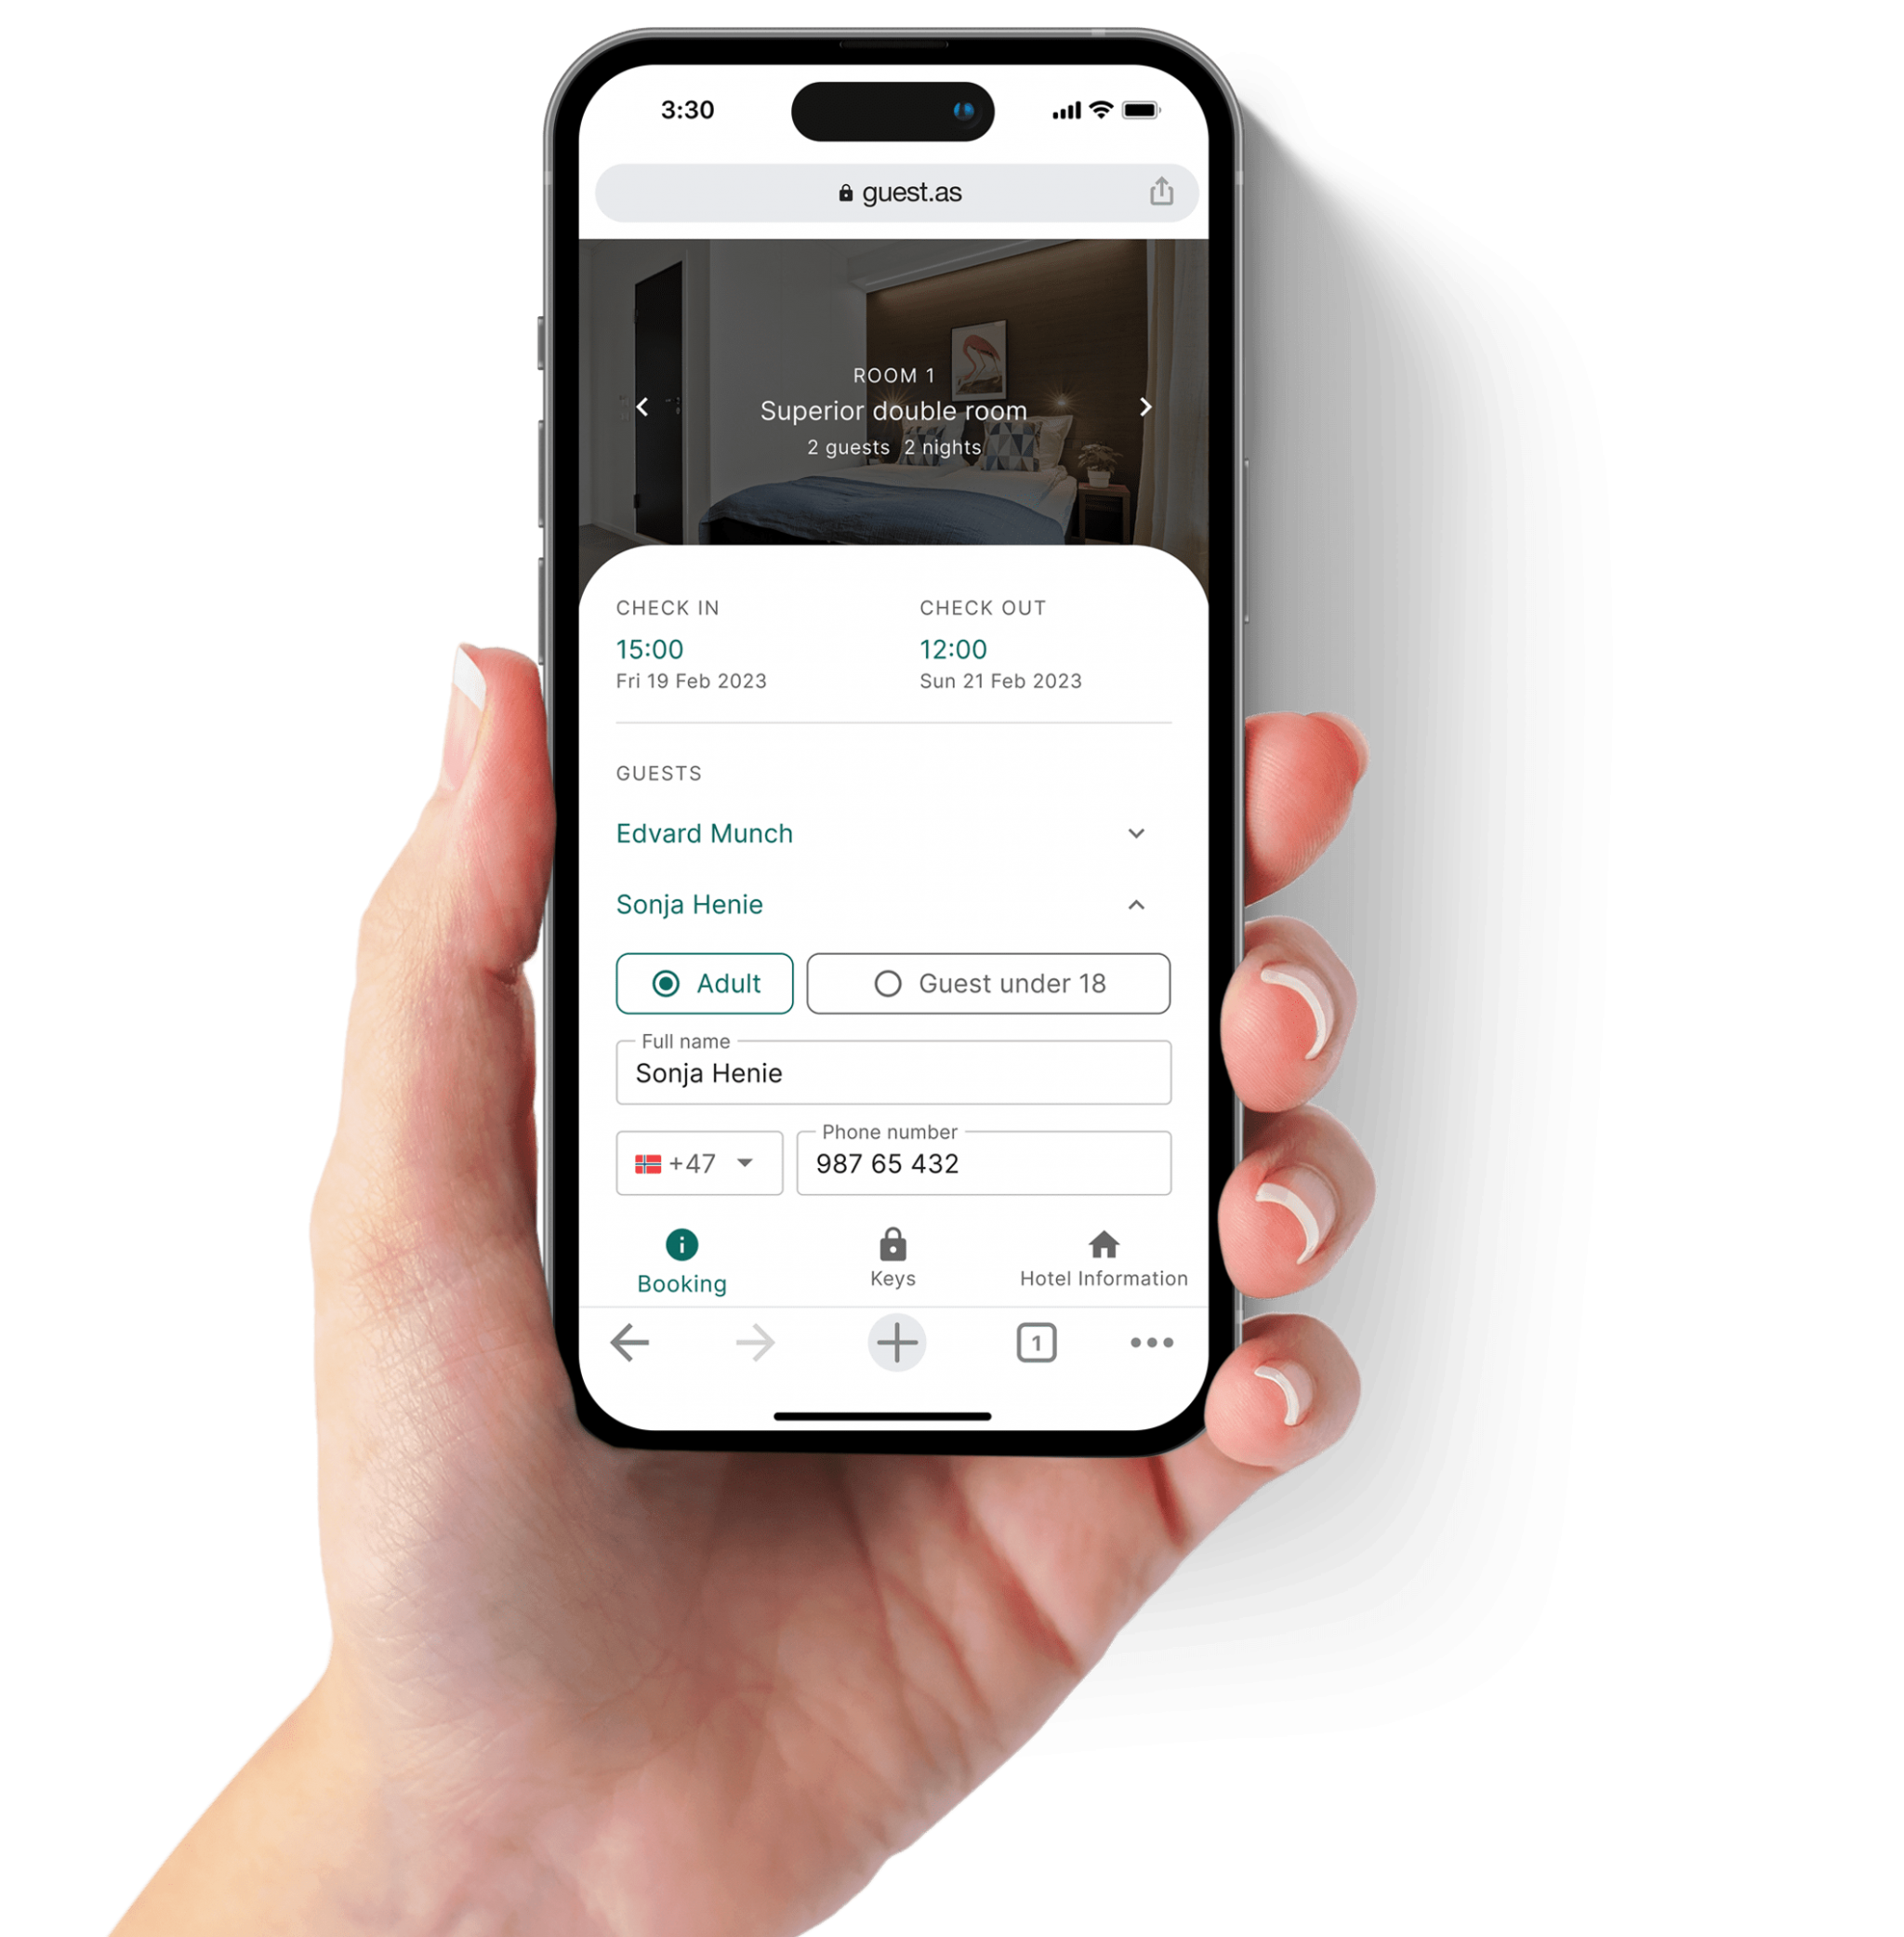 mobile key check-in solution for hotels